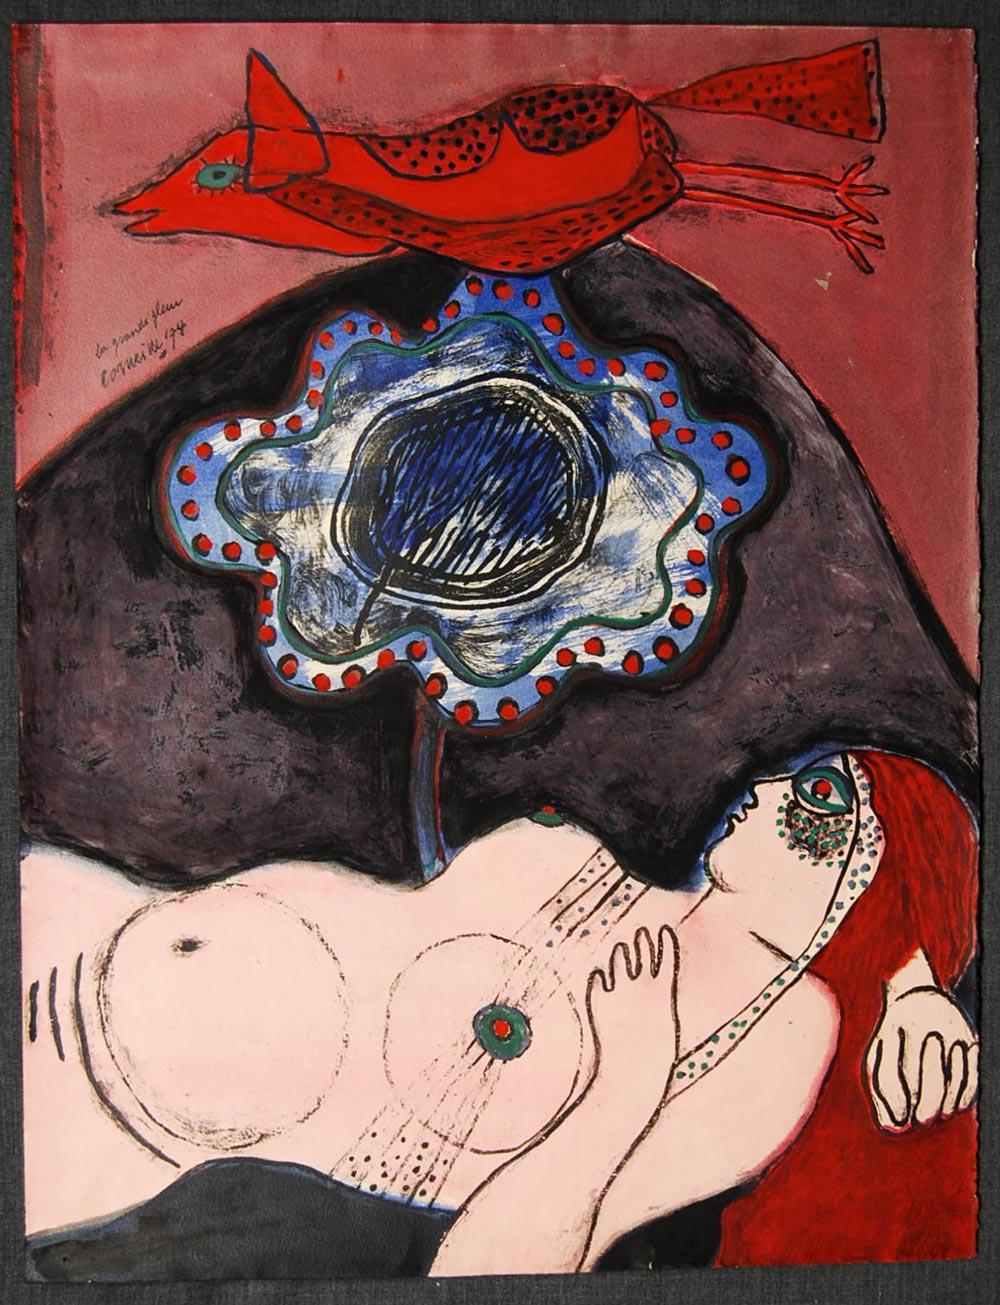 Guillaume Corneille

“Le Gran Fleur”, 1974
Painting Gouache and Acrylic Paint on paper
25.5 x 19.5 in
66 x 50 cm
signed and dated in image
CONDITION NOTE: Push pin holes in all 4 corners

As a co-founder of the famed experimental artist group CoBrA